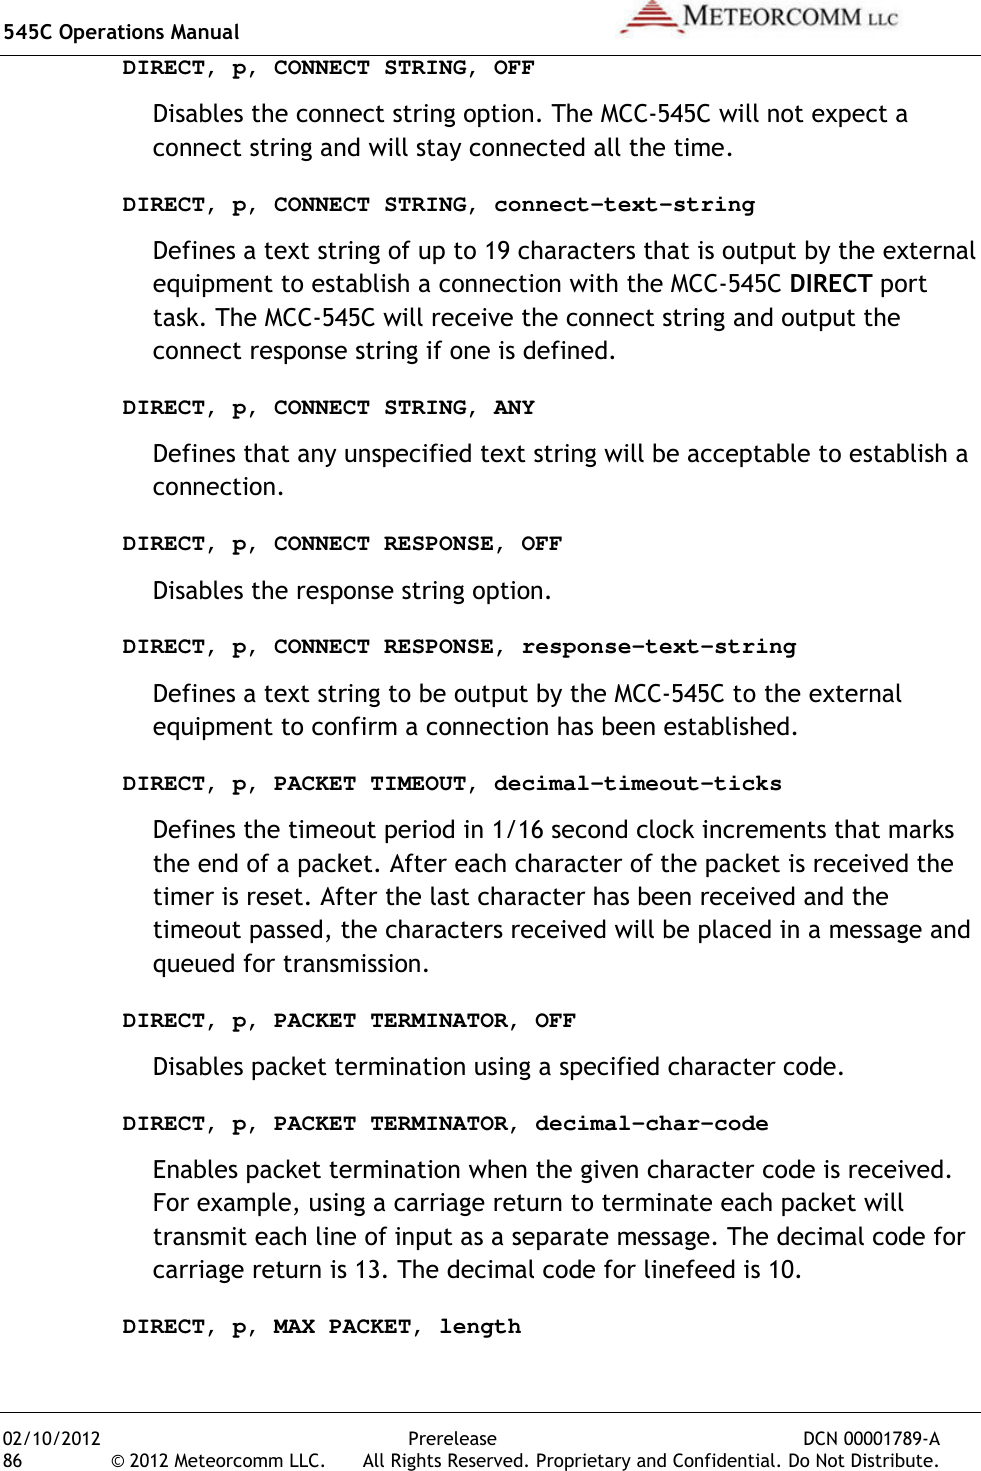 545C Operations Manual   02/10/2012  Prerelease  DCN 00001789-A 86  © 2012 Meteorcomm LLC.   All Rights Reserved. Proprietary and Confidential. Do Not Distribute. DIRECT, p, CONNECT STRING, OFF Disables the connect string option. The MCC-545C will not expect a connect string and will stay connected all the time. DIRECT, p, CONNECT STRING, connect-text-string Defines a text string of up to 19 characters that is output by the external equipment to establish a connection with the MCC-545C DIRECT port task. The MCC-545C will receive the connect string and output the connect response string if one is defined. DIRECT, p, CONNECT STRING, ANY Defines that any unspecified text string will be acceptable to establish a connection. DIRECT, p, CONNECT RESPONSE, OFF Disables the response string option. DIRECT, p, CONNECT RESPONSE, response-text-string Defines a text string to be output by the MCC-545C to the external equipment to confirm a connection has been established. DIRECT, p, PACKET TIMEOUT, decimal-timeout-ticks Defines the timeout period in 1/16 second clock increments that marks the end of a packet. After each character of the packet is received the timer is reset. After the last character has been received and the timeout passed, the characters received will be placed in a message and queued for transmission. DIRECT, p, PACKET TERMINATOR, OFF Disables packet termination using a specified character code. DIRECT, p, PACKET TERMINATOR, decimal-char-code Enables packet termination when the given character code is received. For example, using a carriage return to terminate each packet will transmit each line of input as a separate message. The decimal code for carriage return is 13. The decimal code for linefeed is 10. DIRECT, p, MAX PACKET, length 